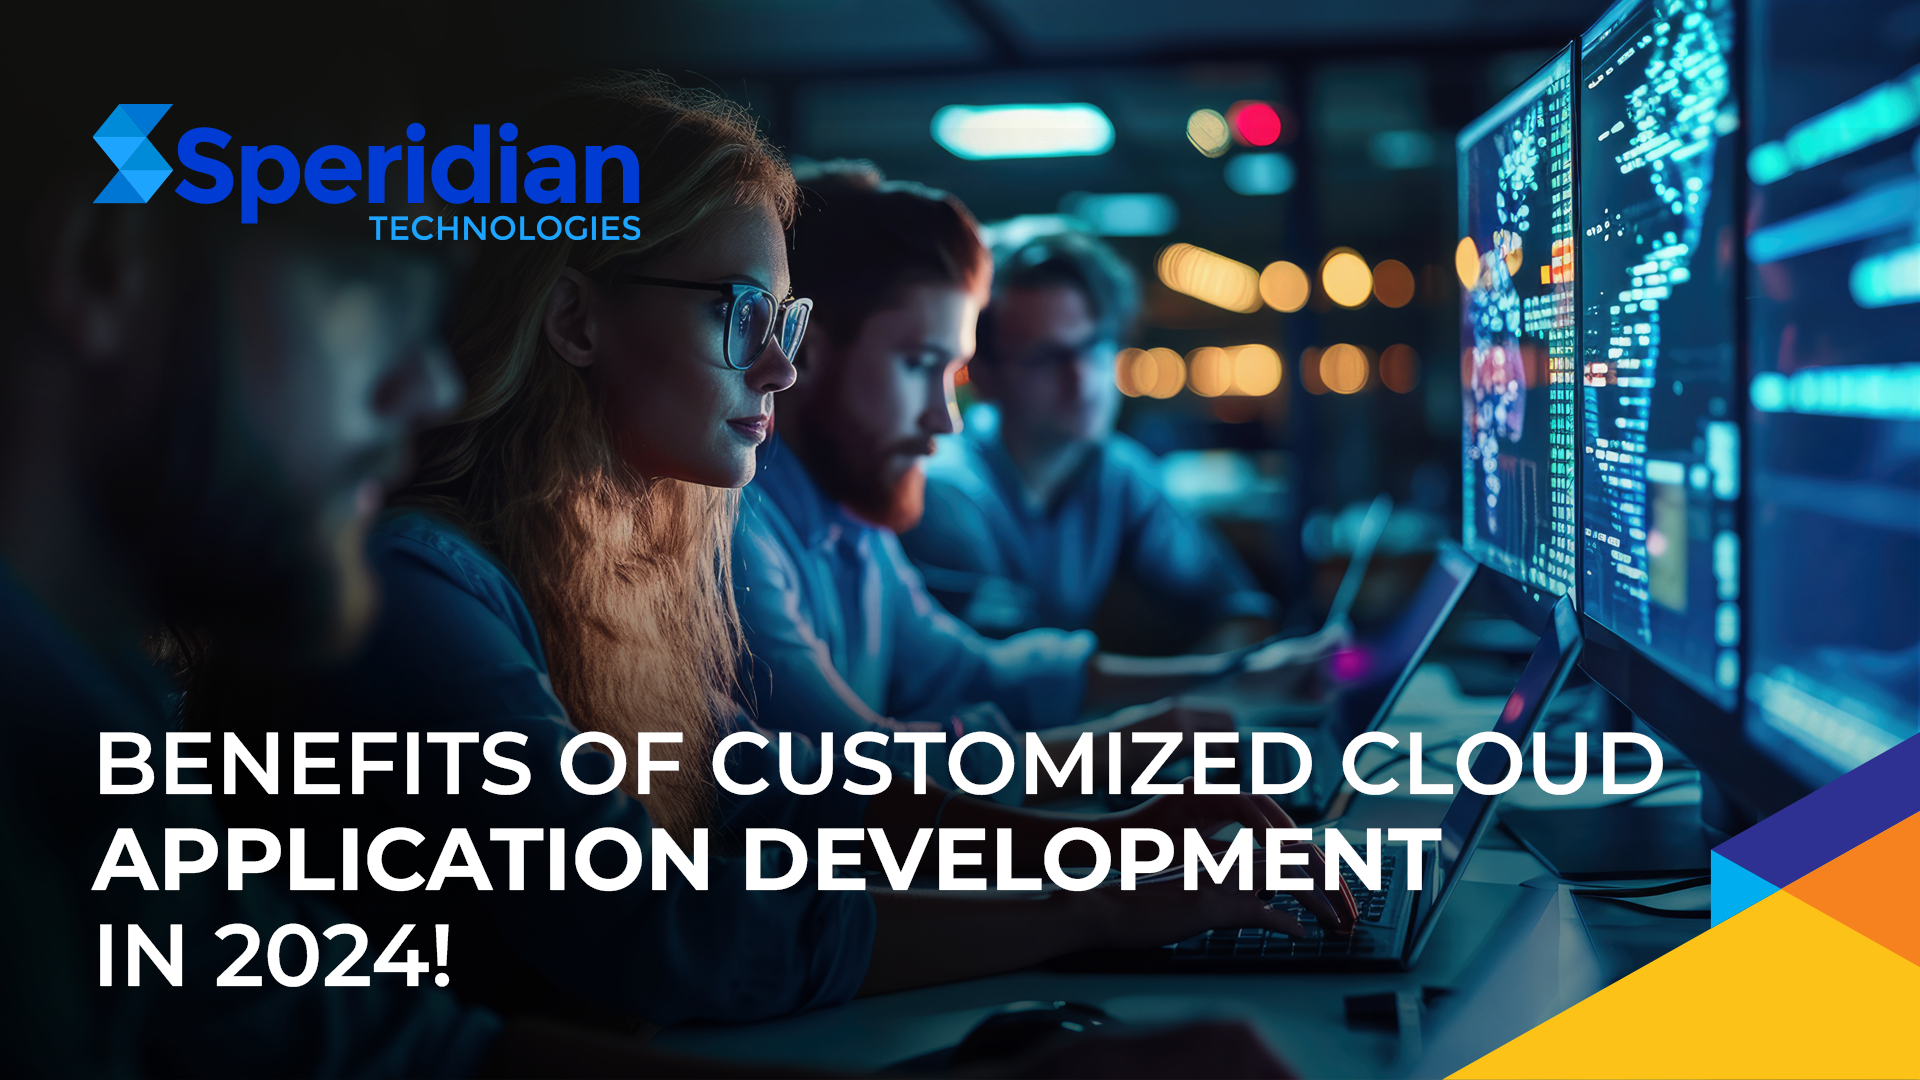 Benefits of Customized Cloud Application Development in 2024